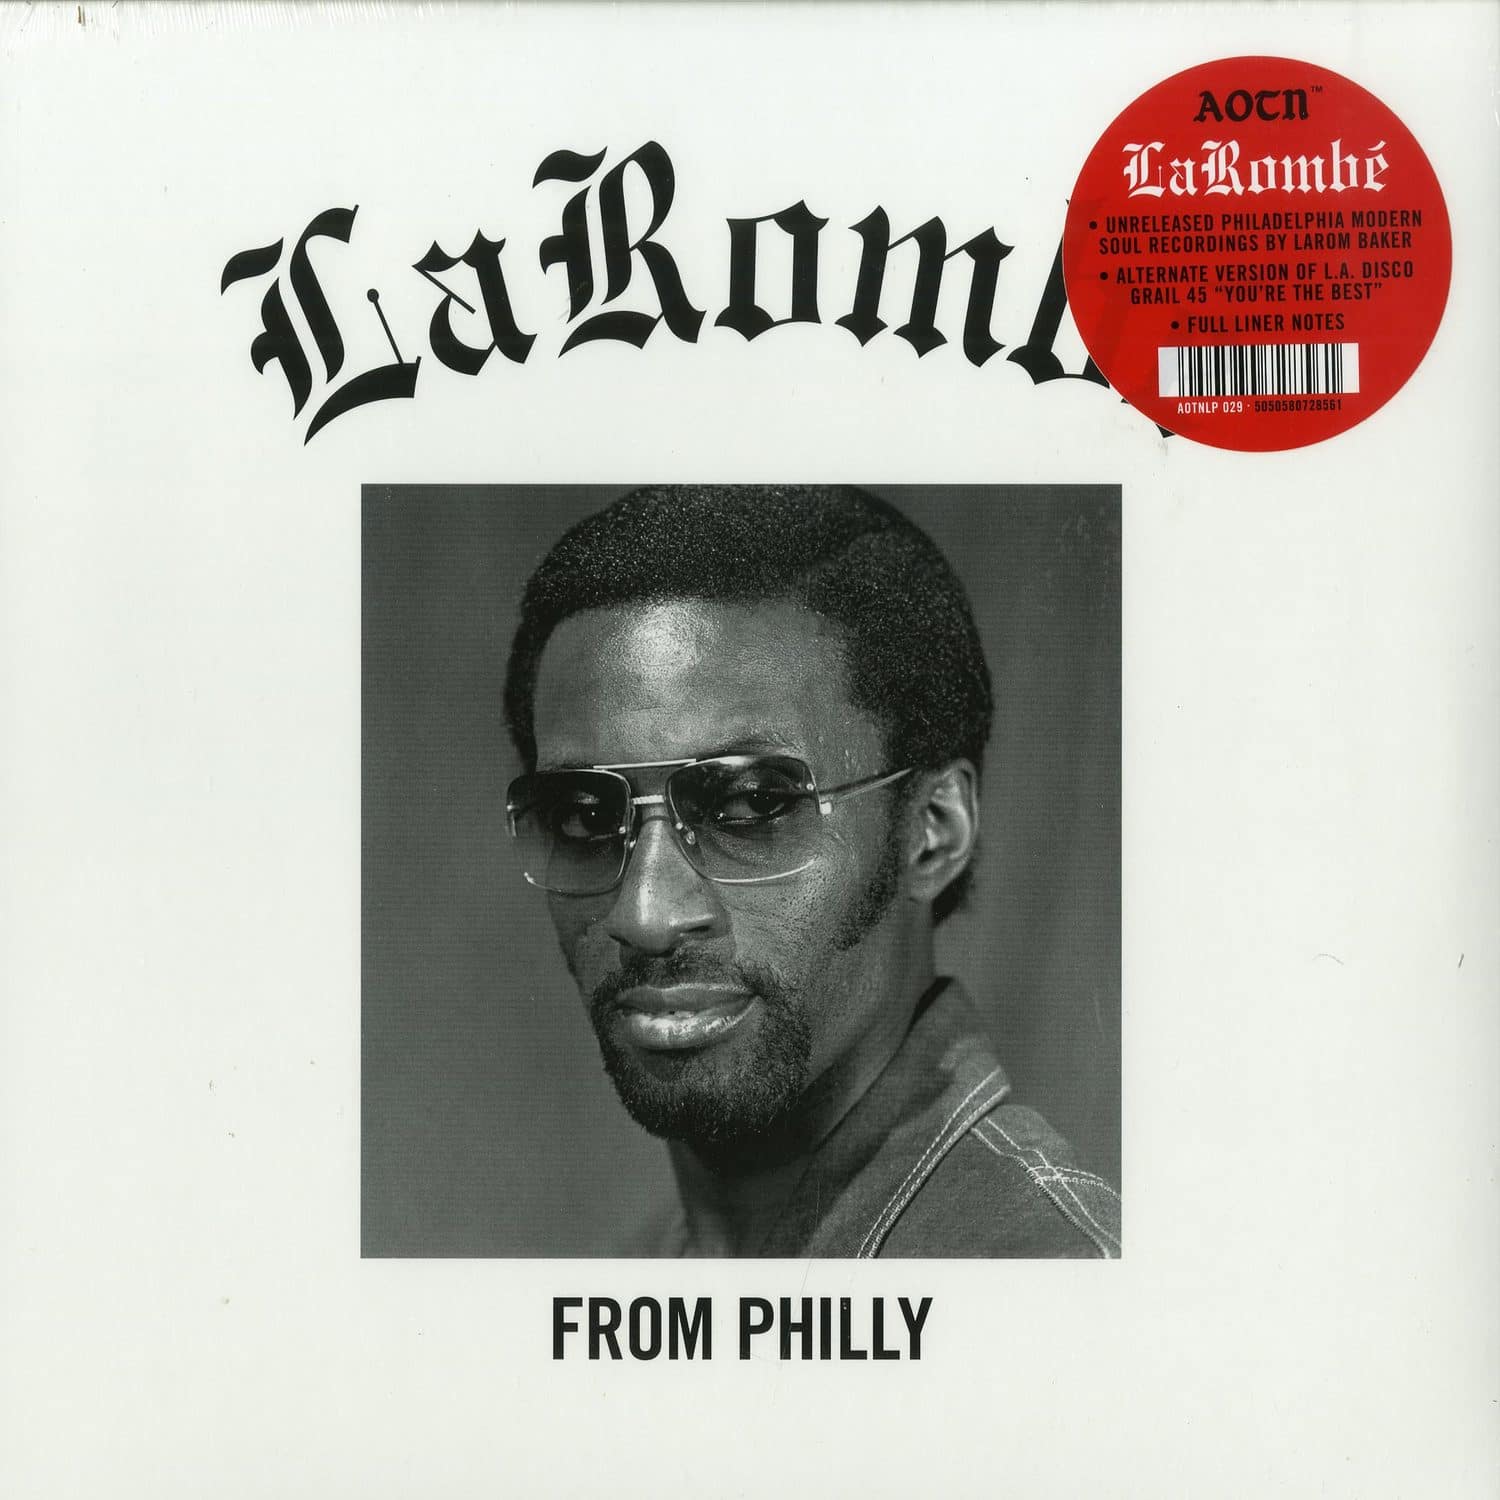 LaRombe - FROM PHILLY 